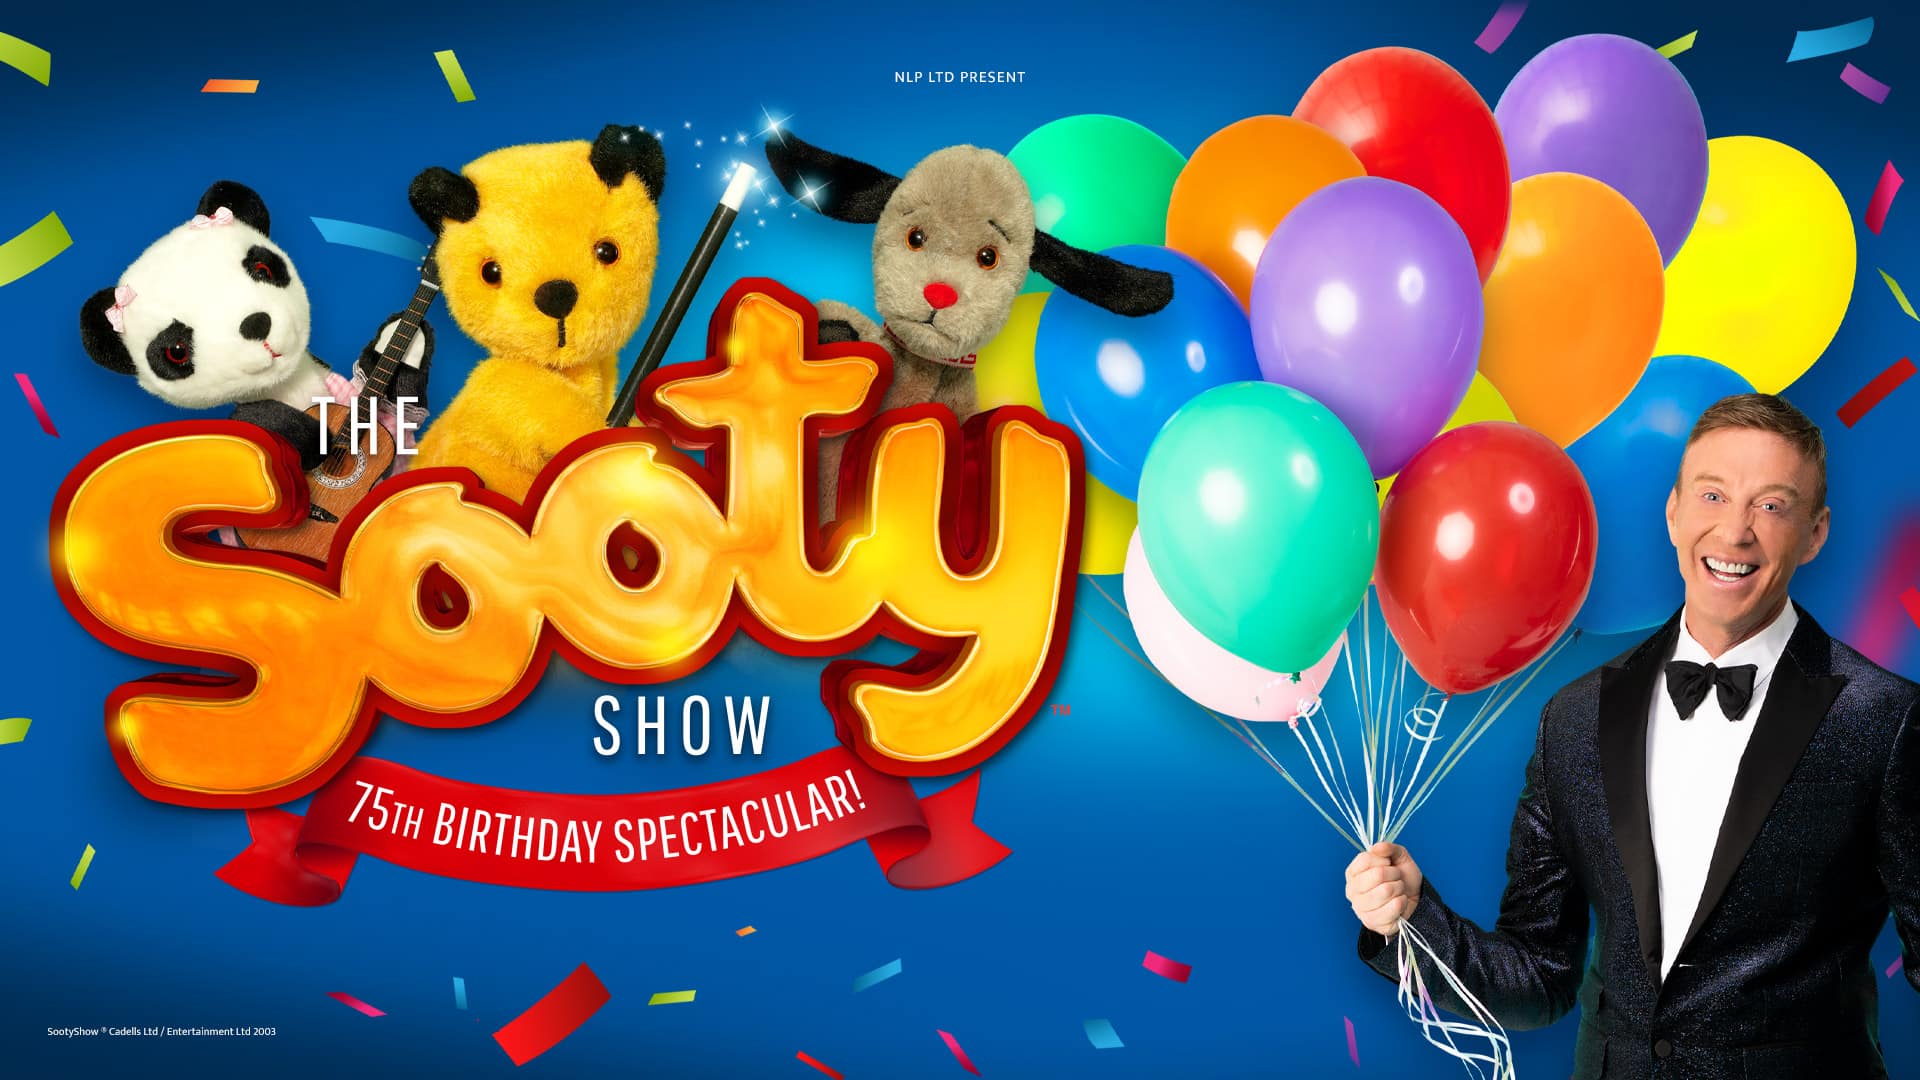 The Sooty Show artwork - On the left: Soo (panda bear glove puppet) holding a puppet-sized guitar, Sooty (yellow bear glove puppet) holding a magic wand, and Sweep (grey dog glove puppet) all peeking out from the Sooty logo - bubbly bold yellow letters with red outline spelling 'Sooty'. Text reads: The Sooty Show ; 75th anniversary spectacular.On the right: A smiling man in a dark blue, glittery tuxedo with a white shirt and black bowtie, holding a bunch of colourful balloons on string. The background is a deep blue and colourful confetti is scattered about the image.